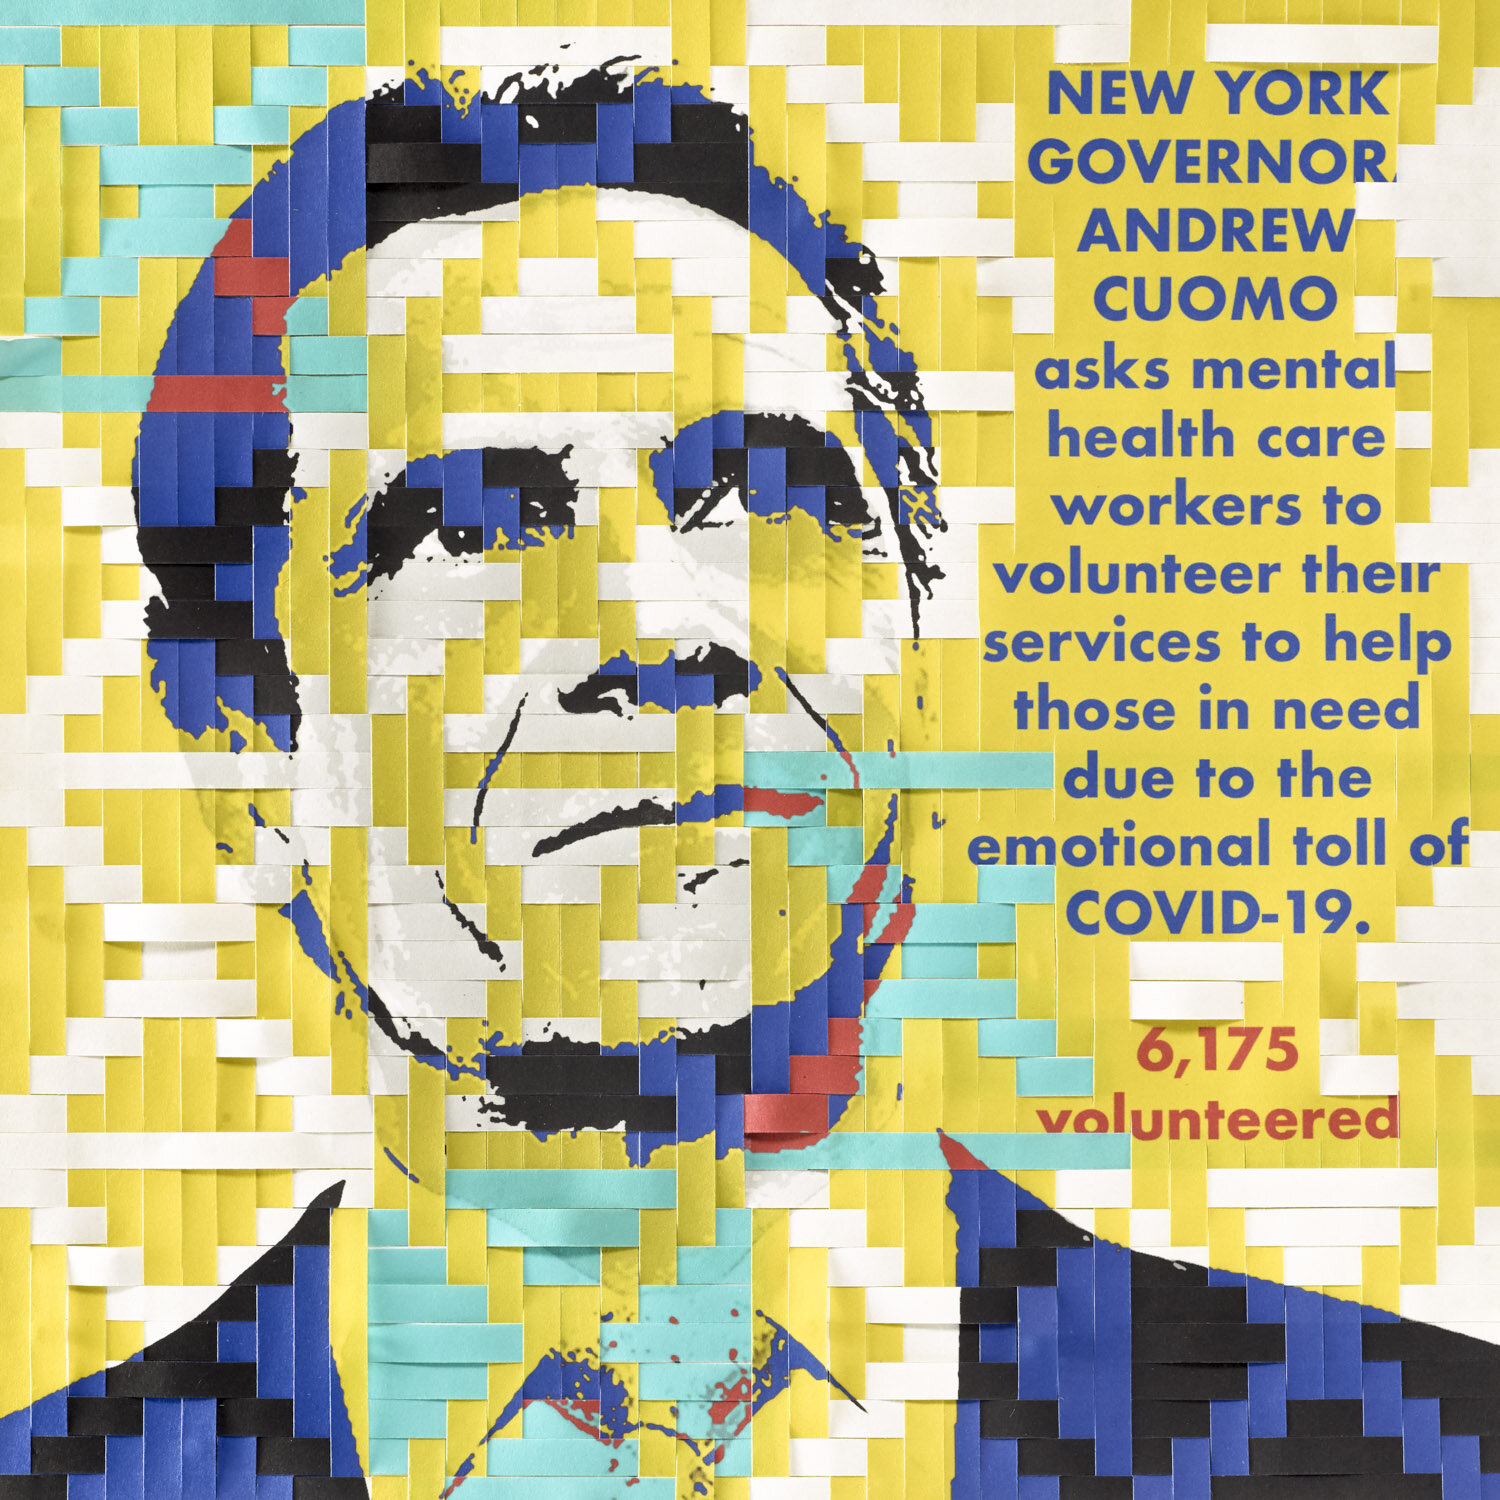 Day 45: Governor Andrew Cuomo